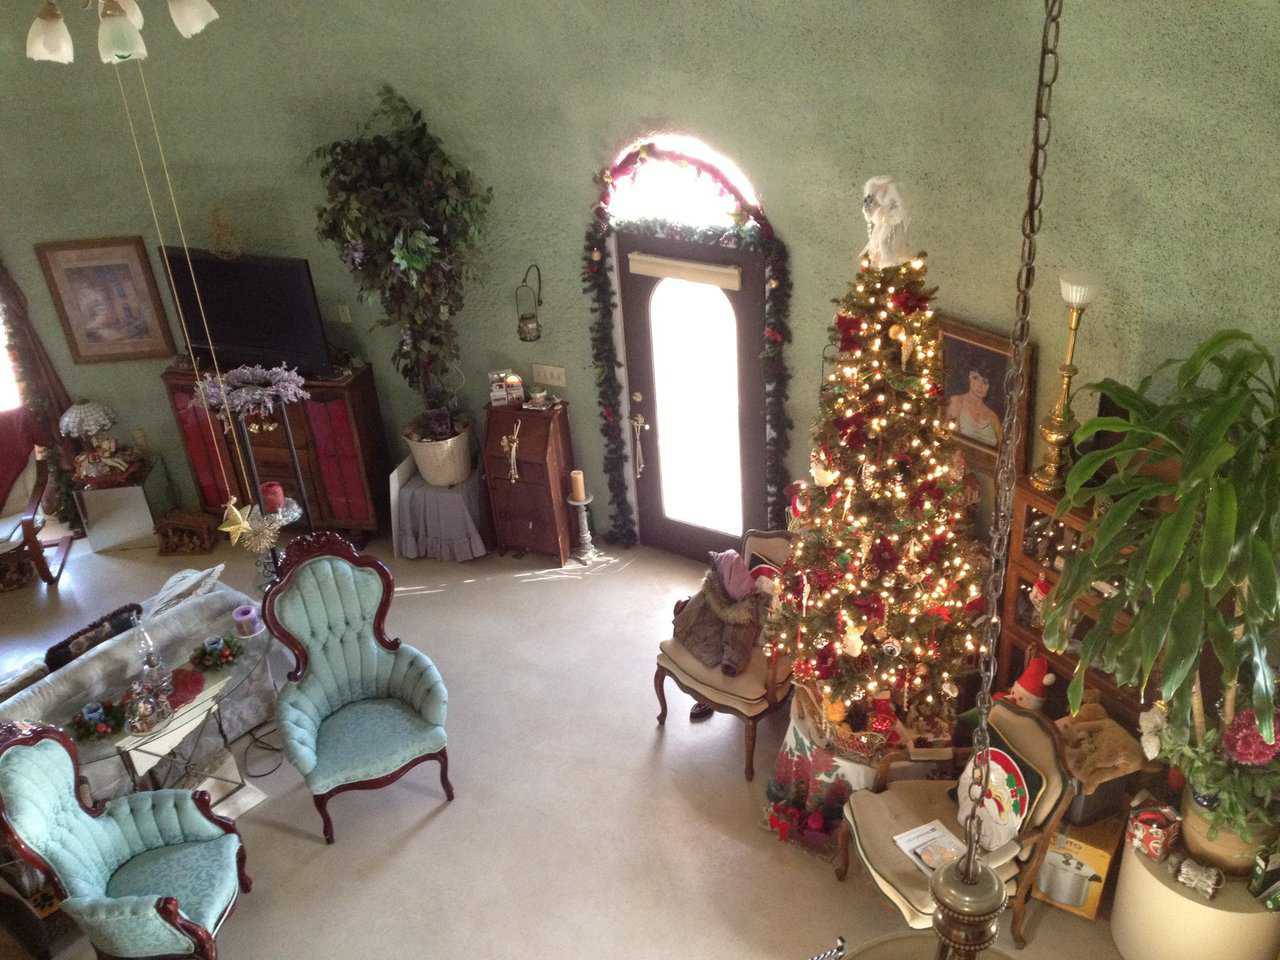 Built in 2007, Yorkie Dome has a diameter of 42 feet, a height of 25 feet, and a living area of 2067 square feet. Glenna loved decorating it for Christmas.